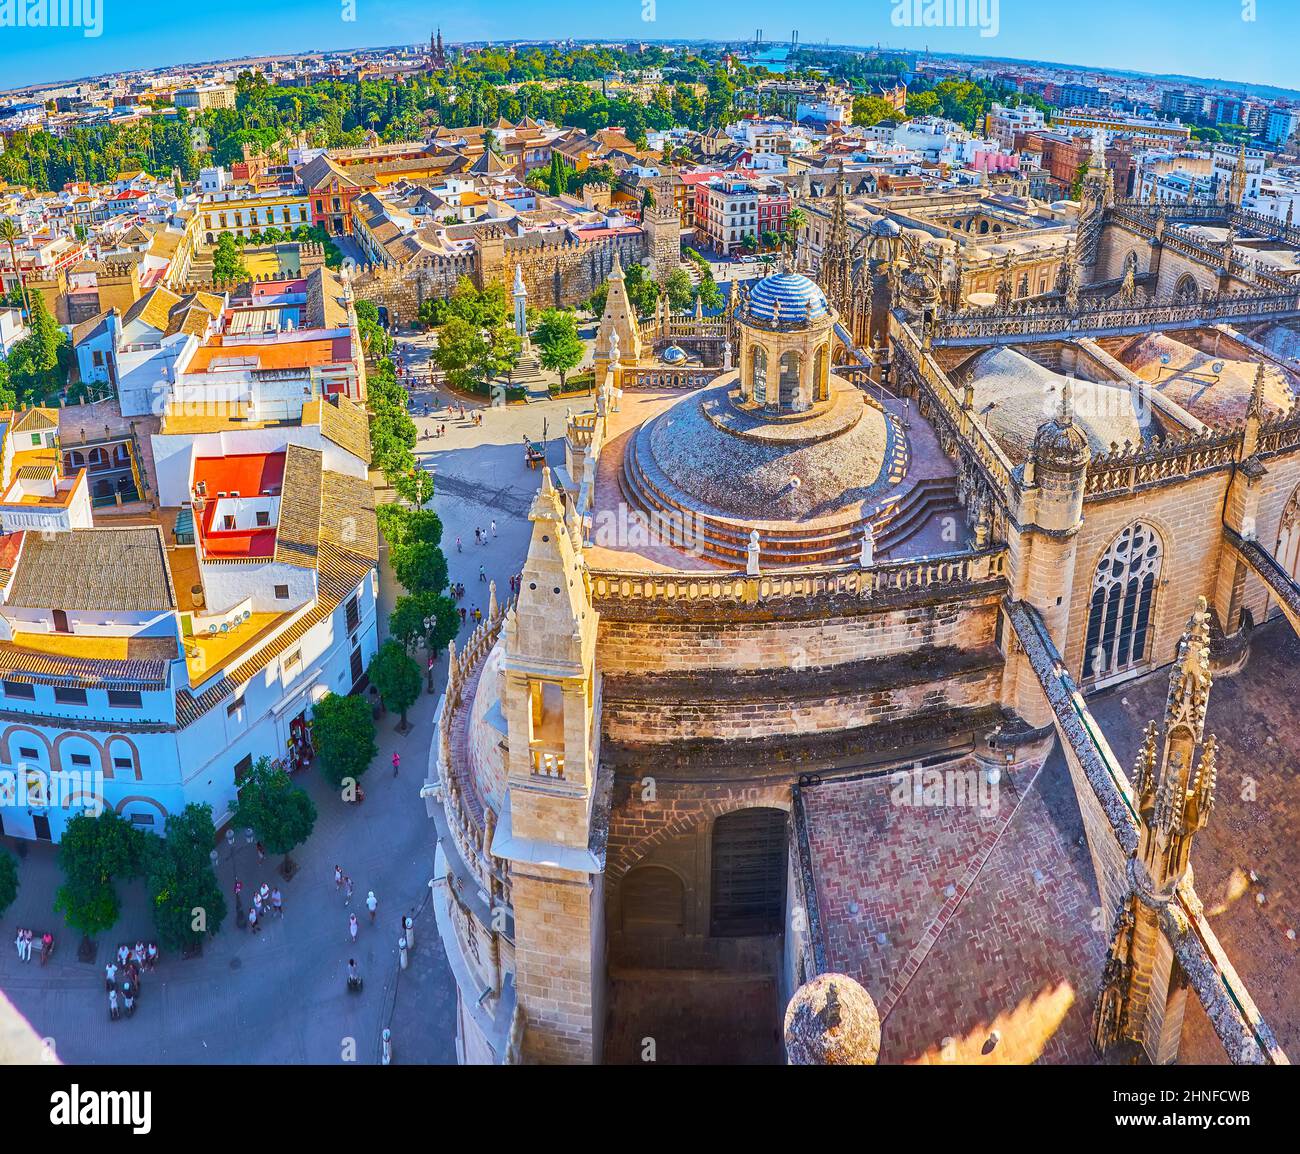 Aerial panorama of Casco Antiguo landmarks from Giralda tower, overlooking dome and Gothic towers of Cathedral, Plaza del Triunfo (Triumph Square), Al Stock Photo